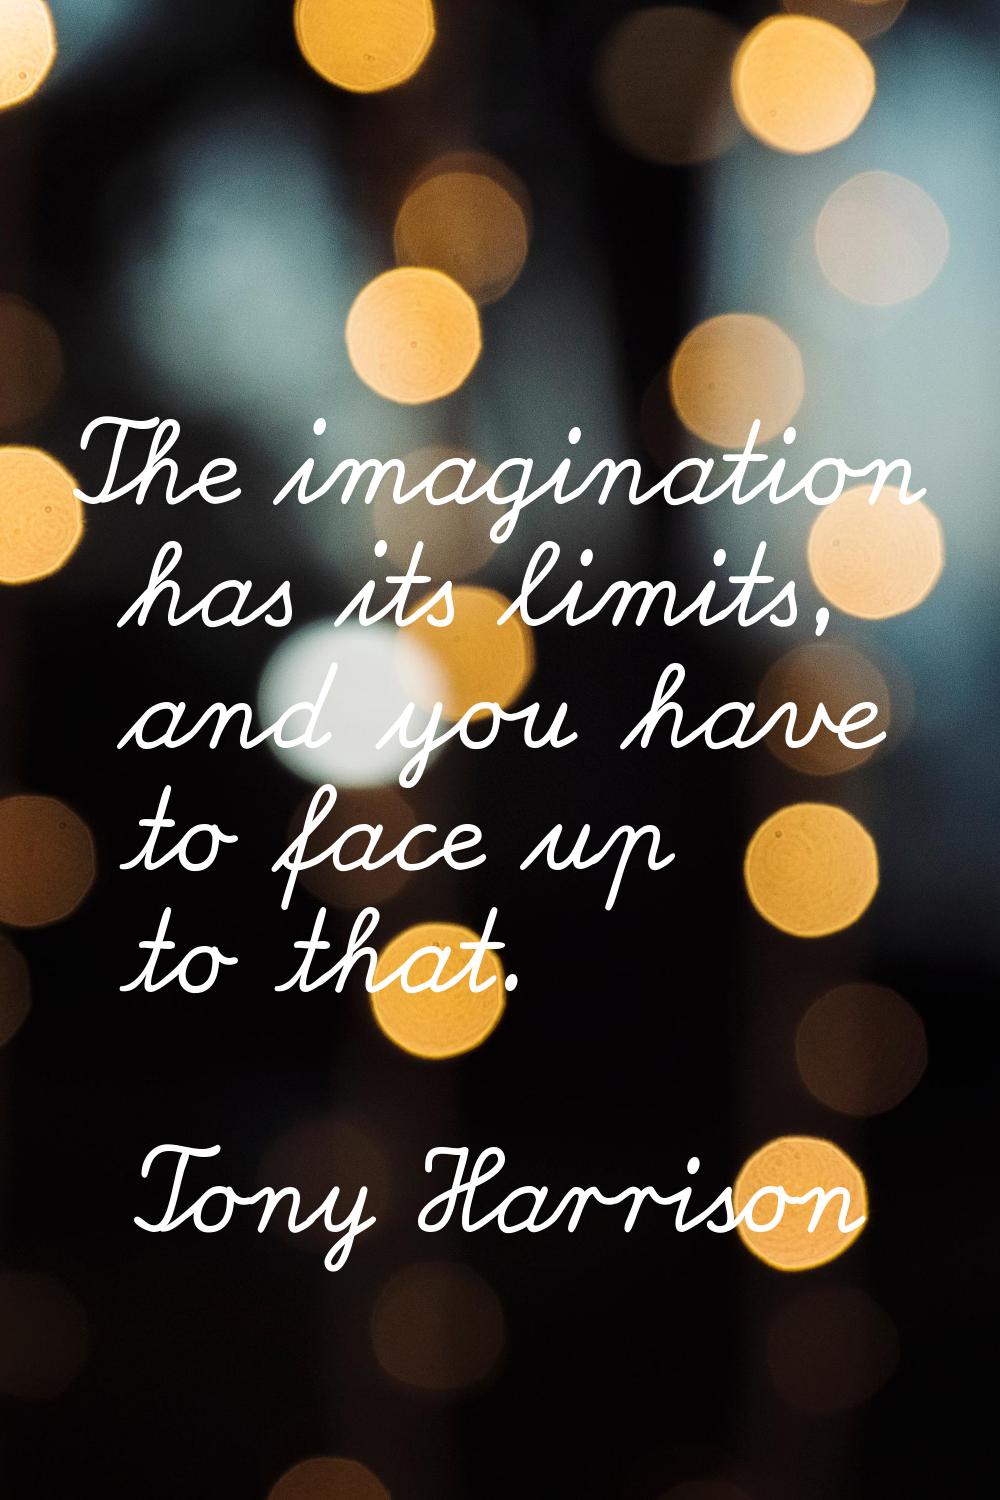 The imagination has its limits, and you have to face up to that.